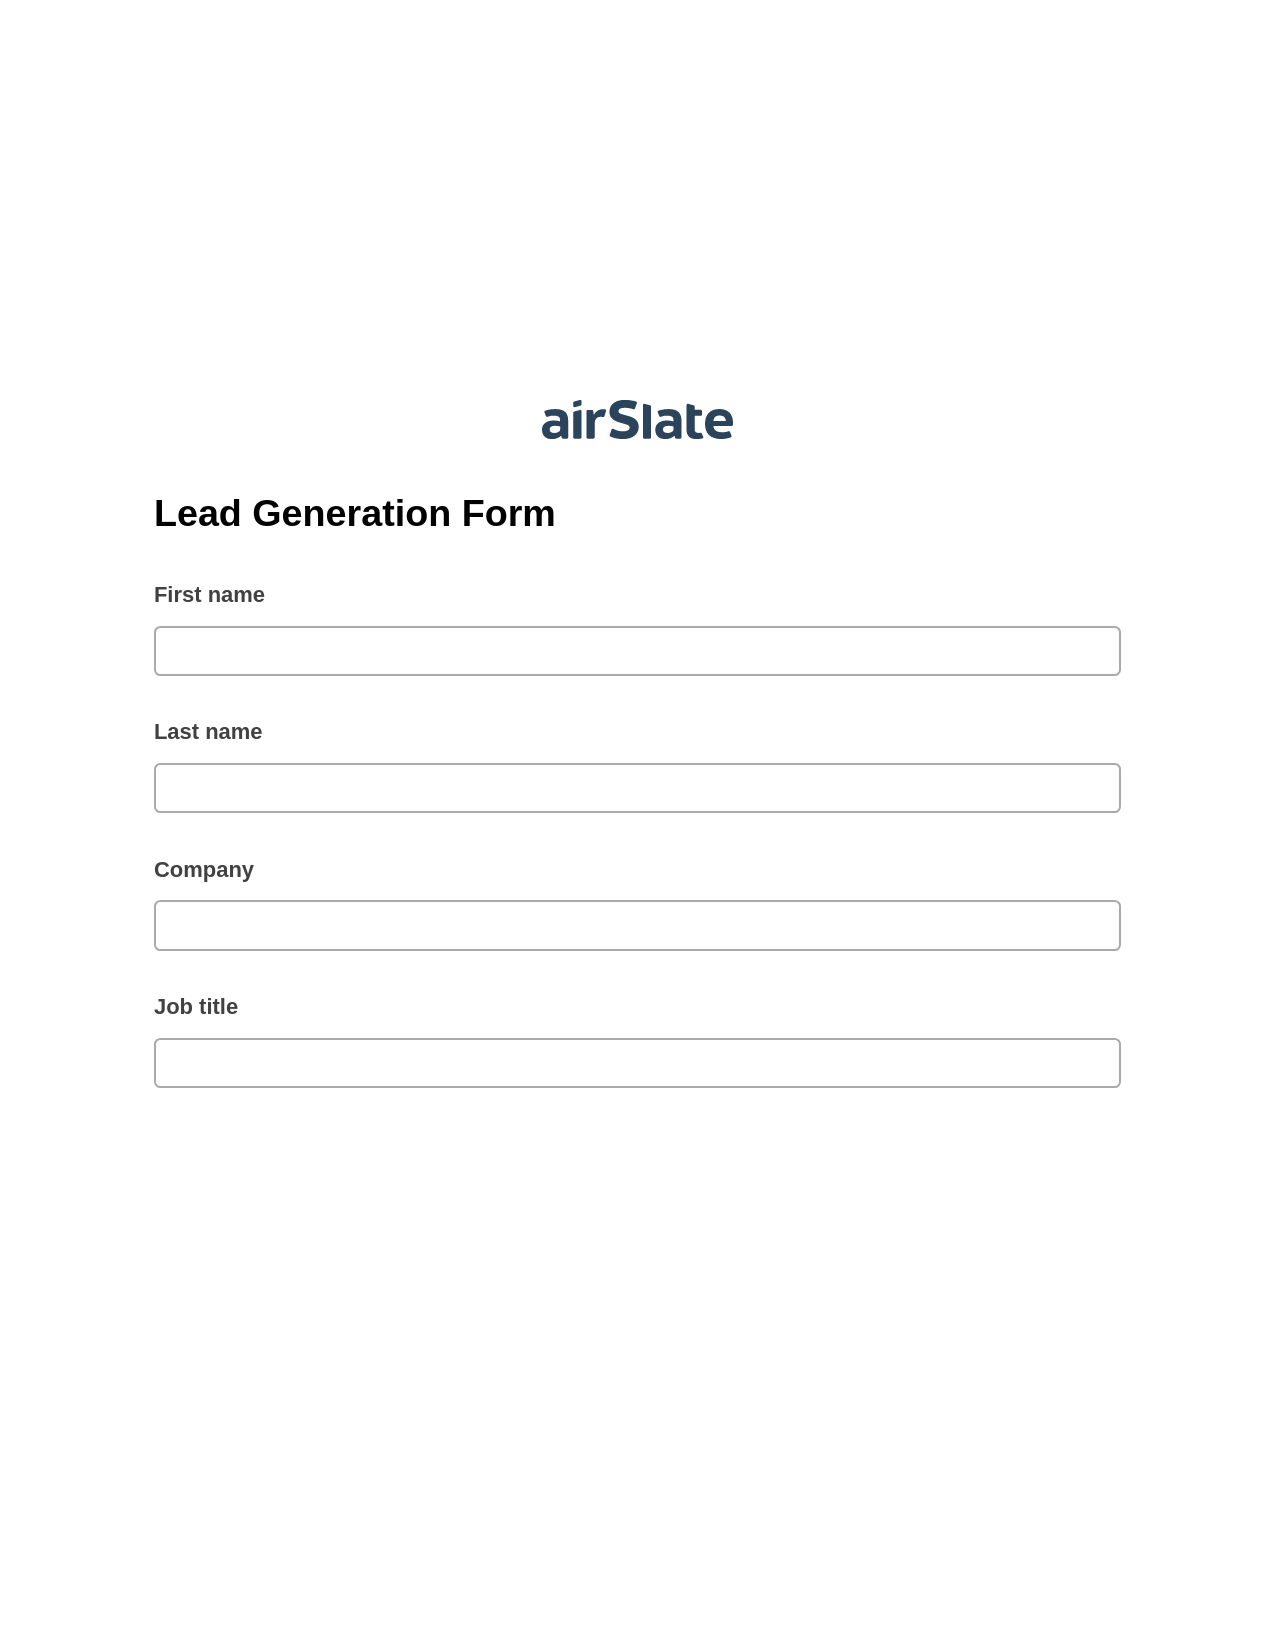 Lead Generation Form Pre-fill Document Bot, Add Tags to Slate Bot, Export to Google Sheet Bot